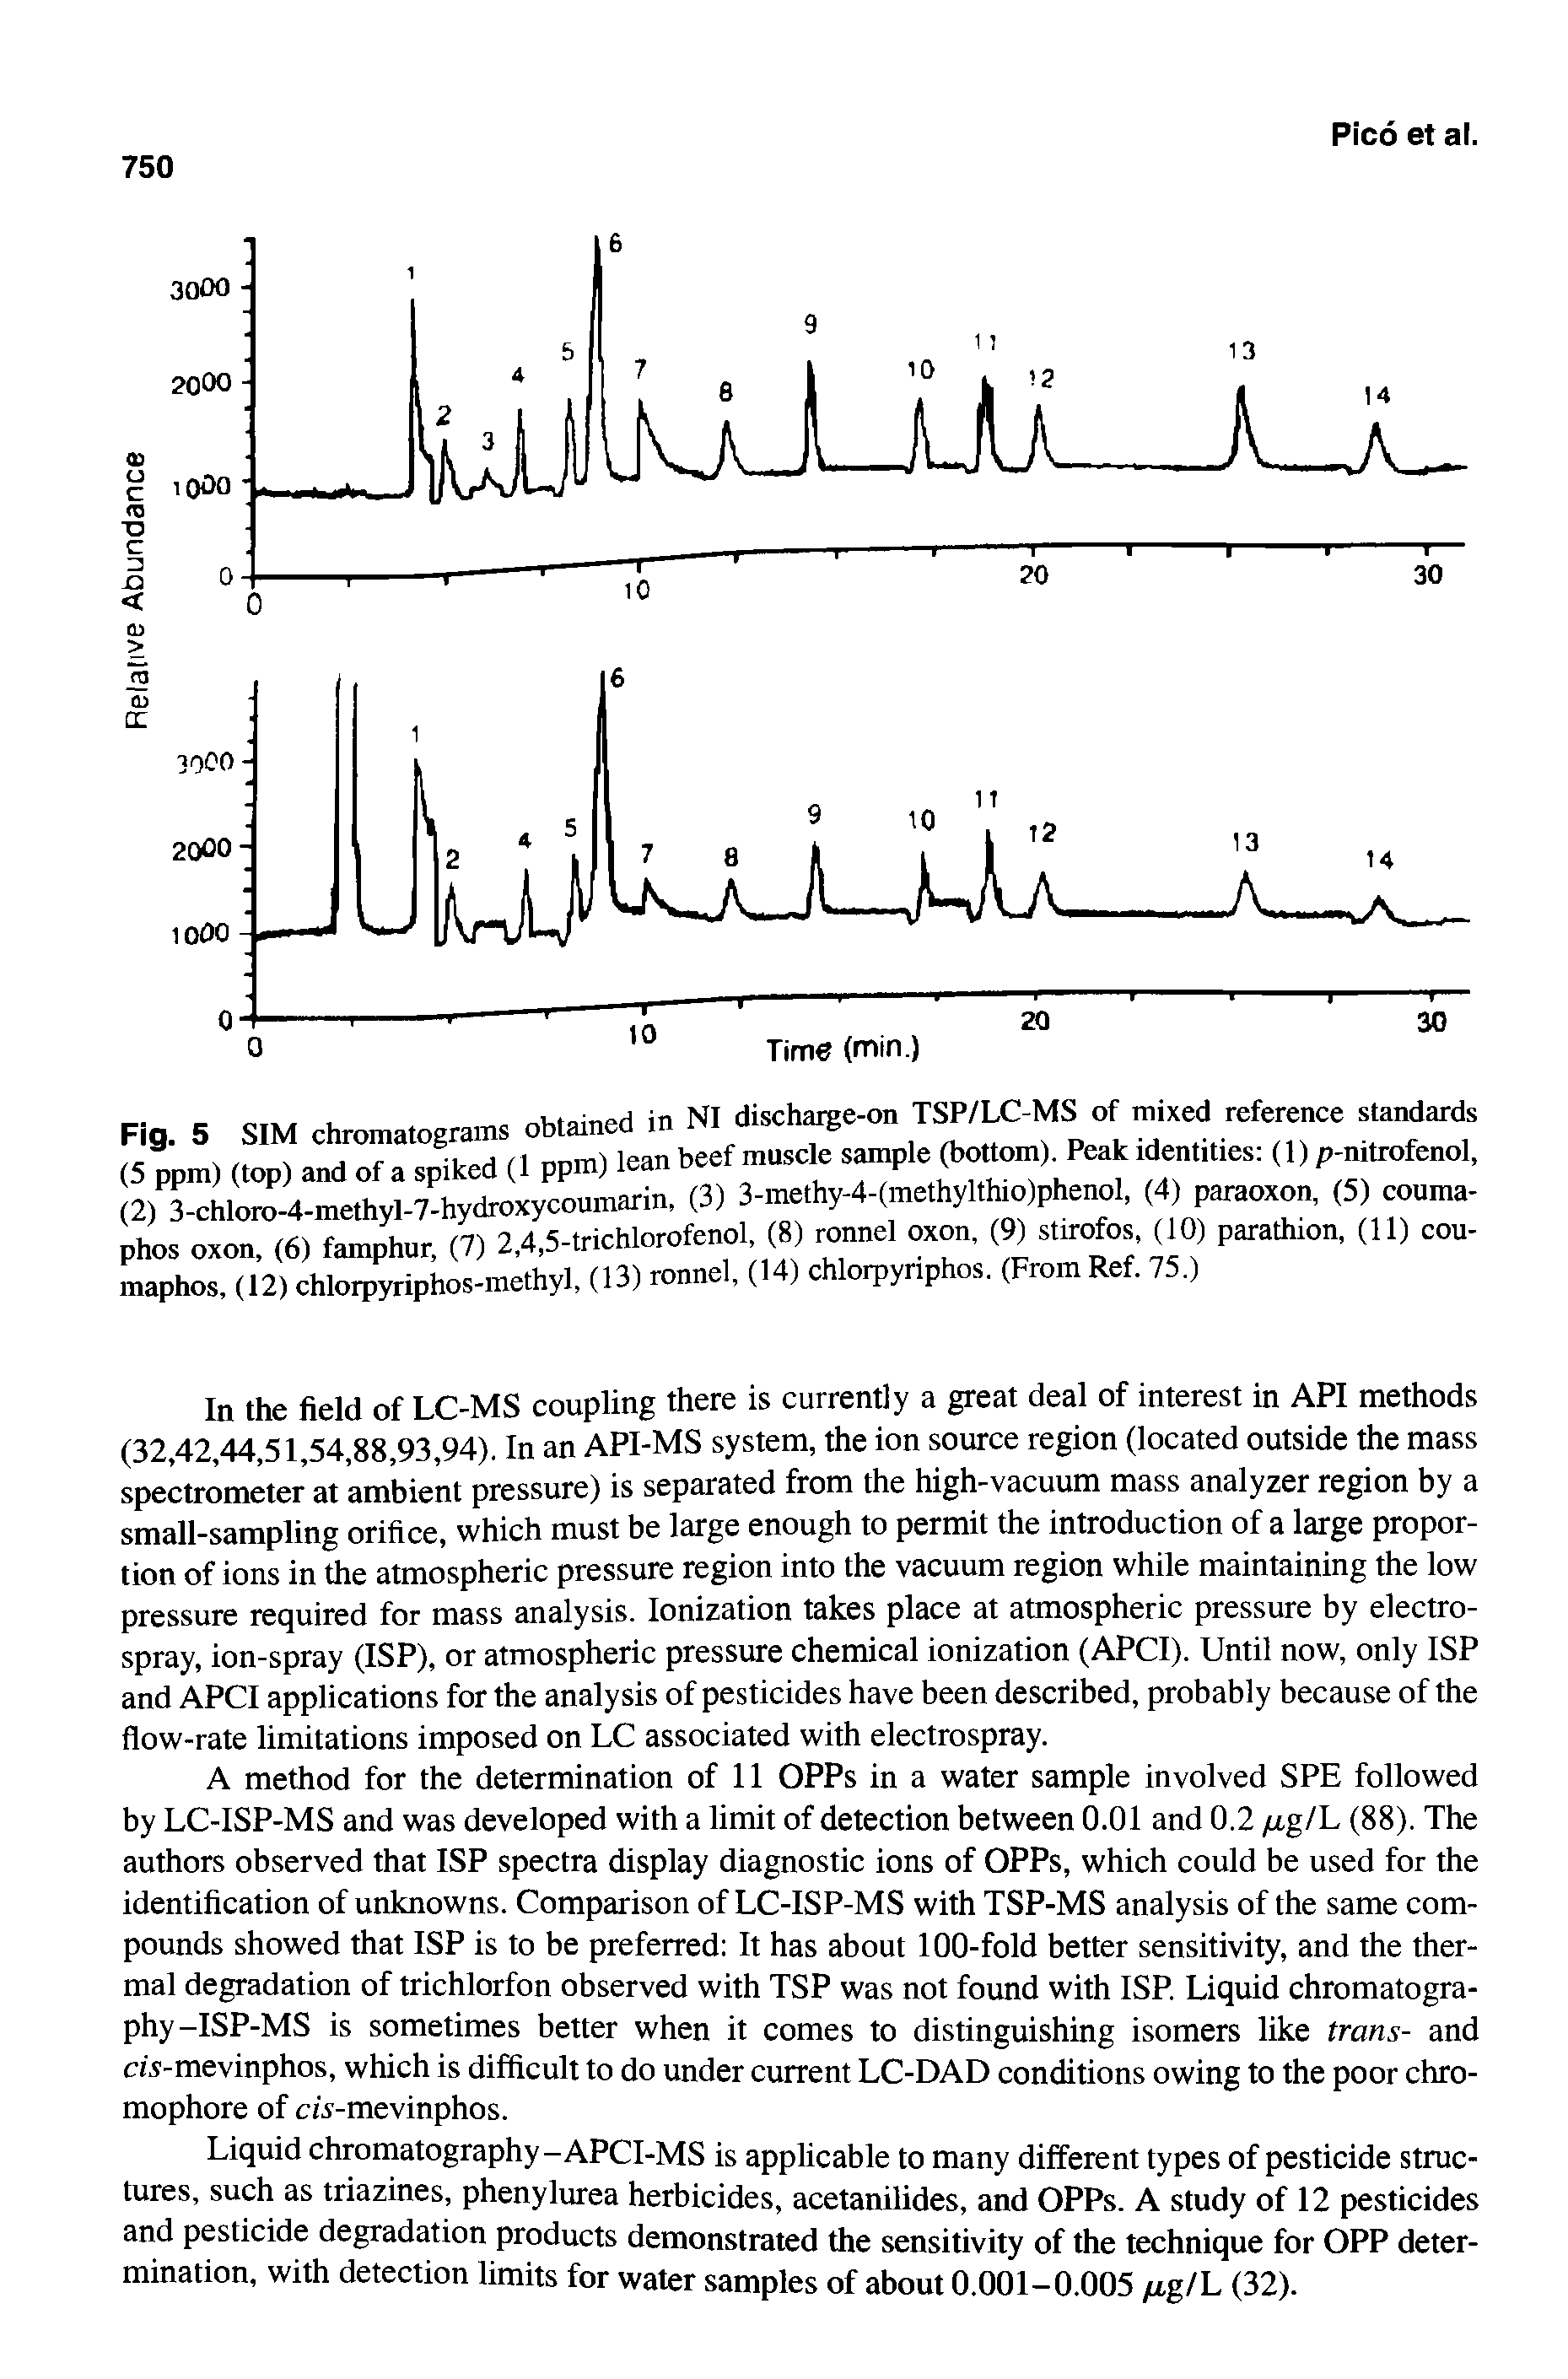 Fig. 5 SIM chromatograms obtained in NI discharge-on TSP/LC-MS of mixed reference standards (5 ppm) (top) and of a spiked (1 ppm) lean beef muscle sample (bottom). Peak identities (1) p-nitrofenol, (2) 3-chloro-4-methyl-7-hydroxycoumarin, (3) 3-methy-4-(methylthio)phenol, (4) paraoxon, (5) couma-phos oxon (6) famphur (7) 2.4,5-trichlorofenol, (8) ronnel oxon, (9) stirofos, (10) parathion, (11) cou-maphos, (12) chlorpyriphos-methyl, (13) ronnel, (14) chlcpyriphos. (From Ref. 75.)...